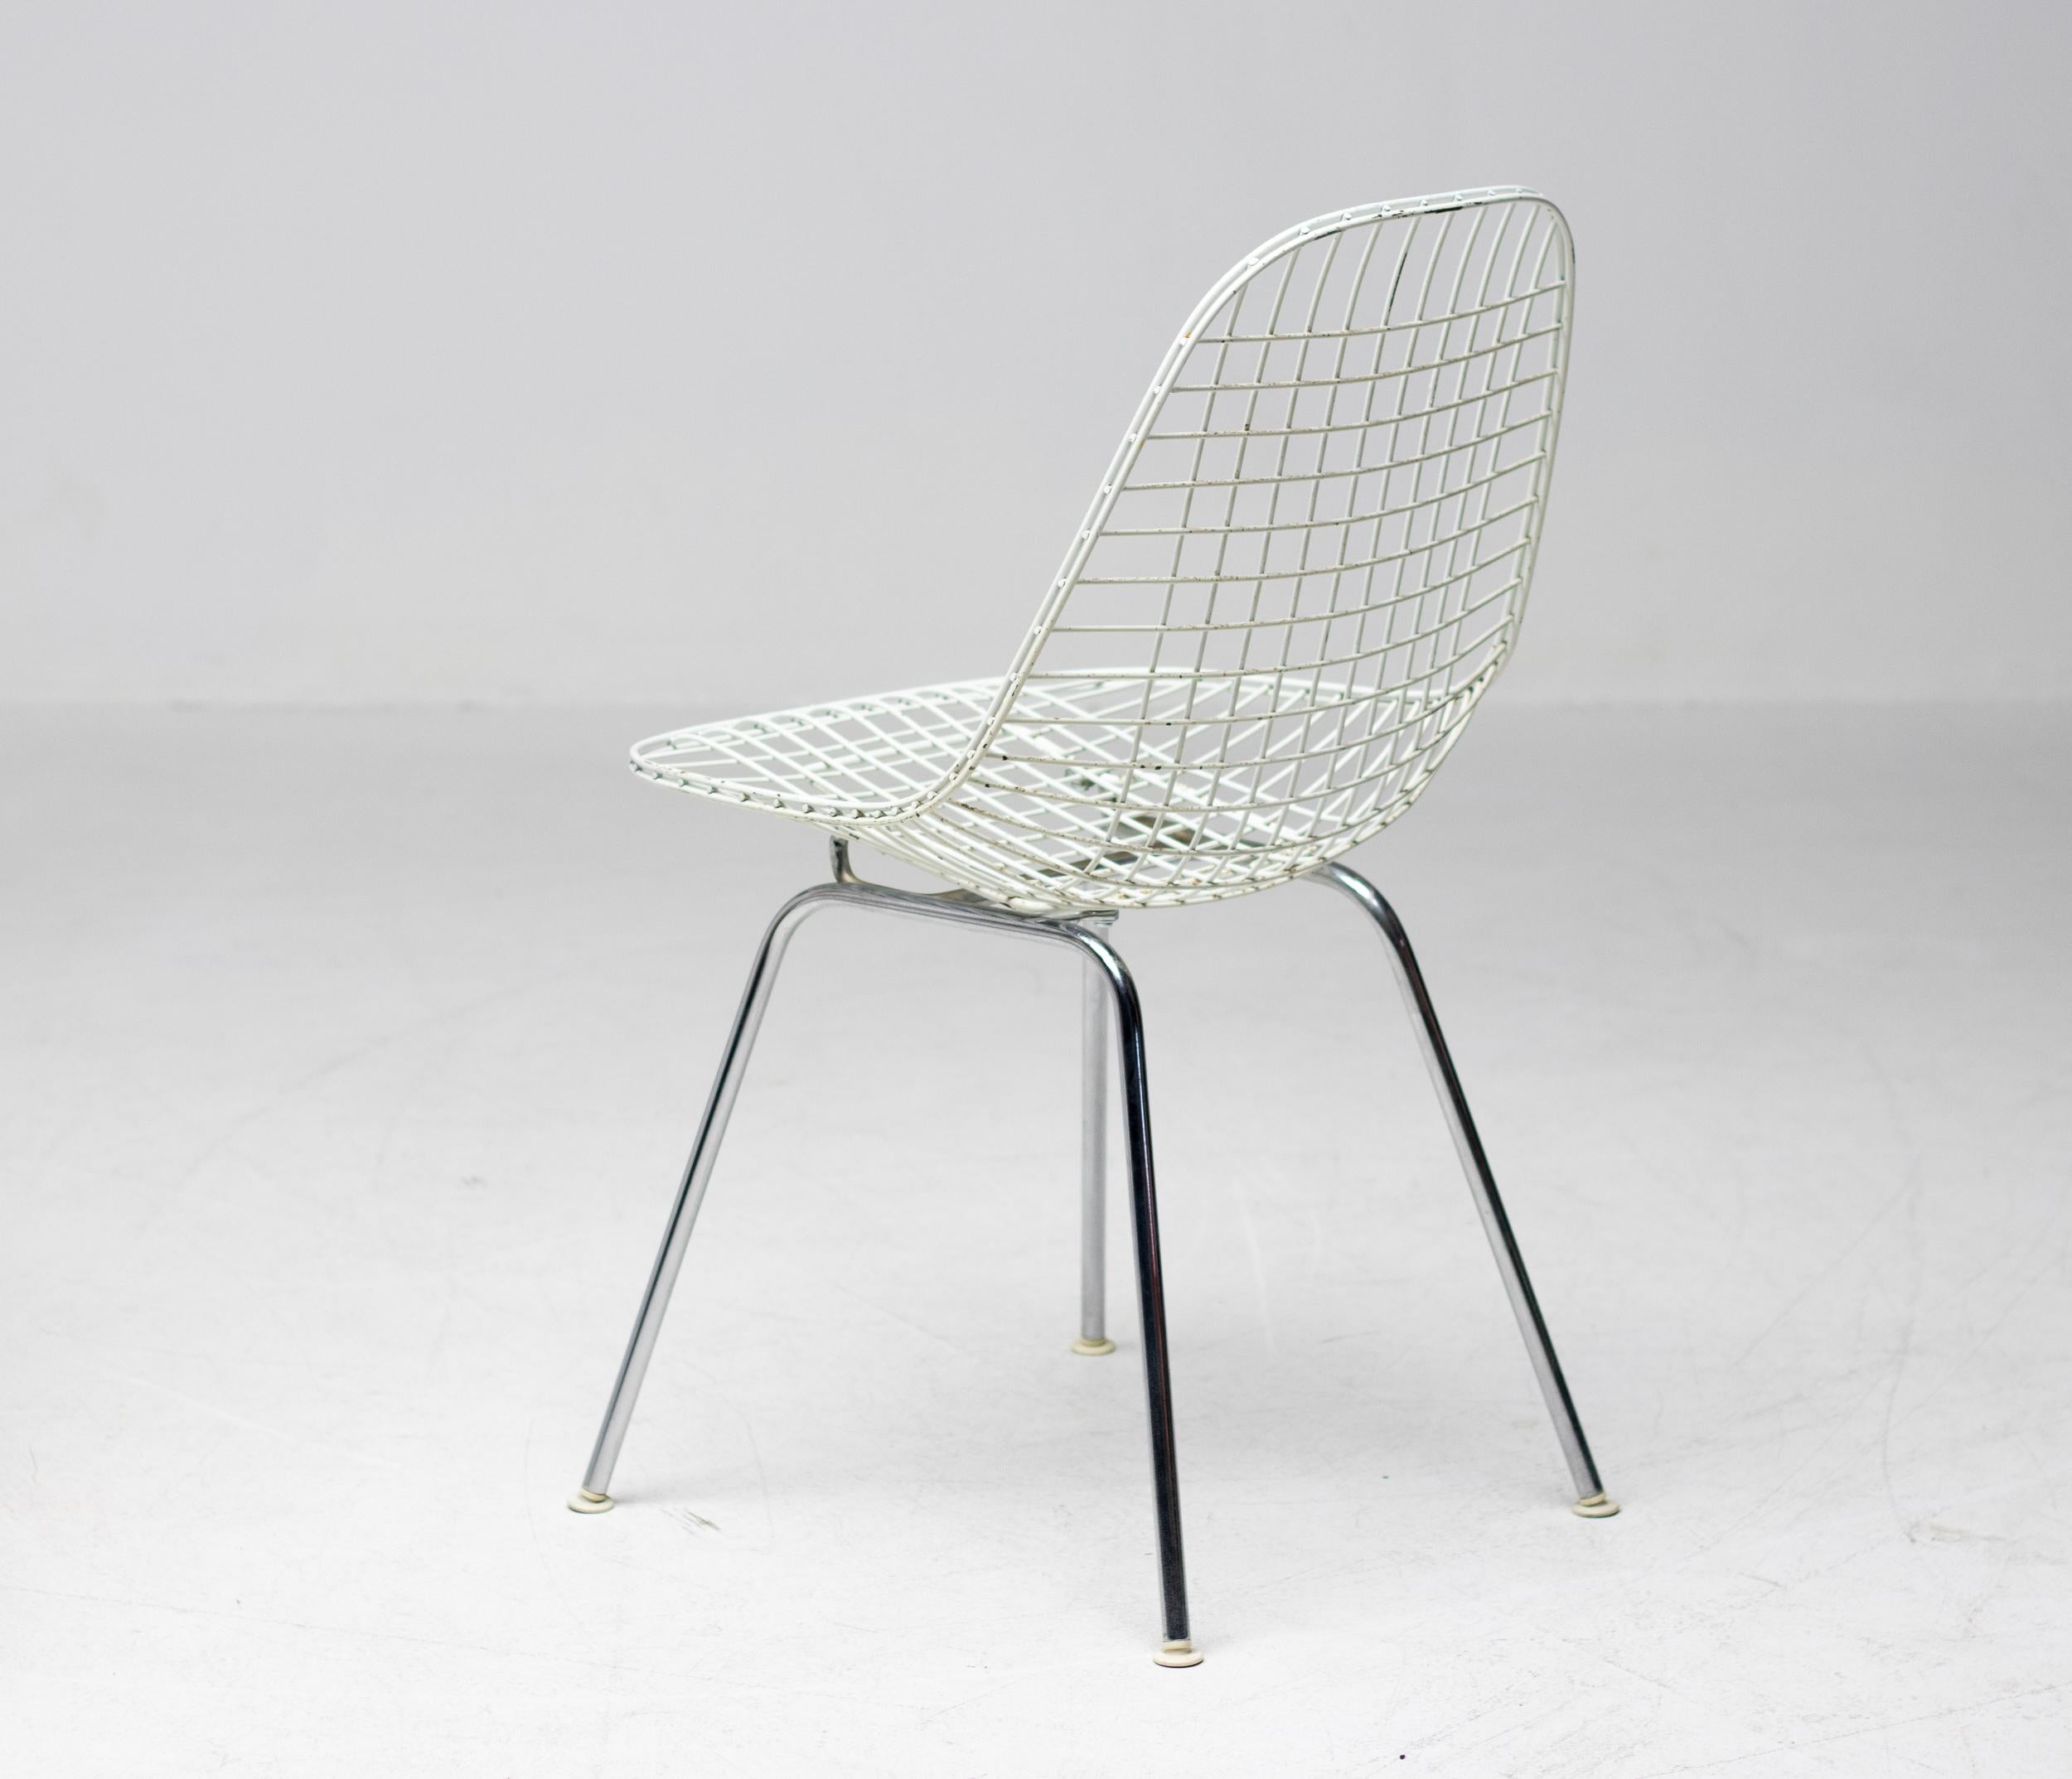 A set of four Eames DKR chairs for Herman Miller. The frame for these chairs is made of a steel wires welded together, powder coated white on a chromed steel 4 leg base. The Bikini pad coverings are the original Herman Miller designed by Alexander